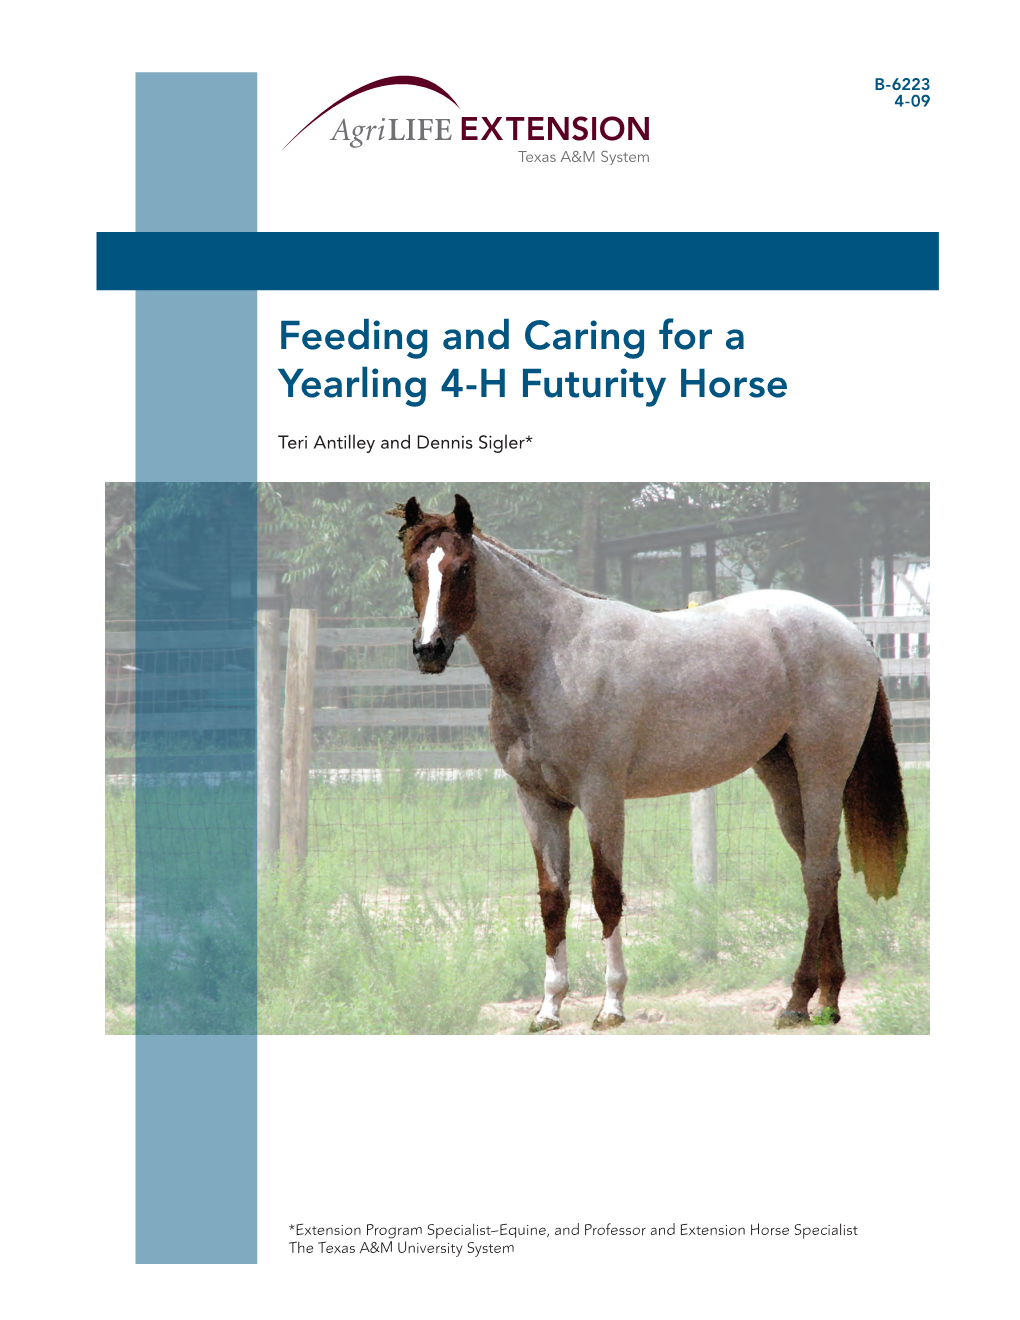 Feeding and Caring for a Yearling 4-H Futurity Horse